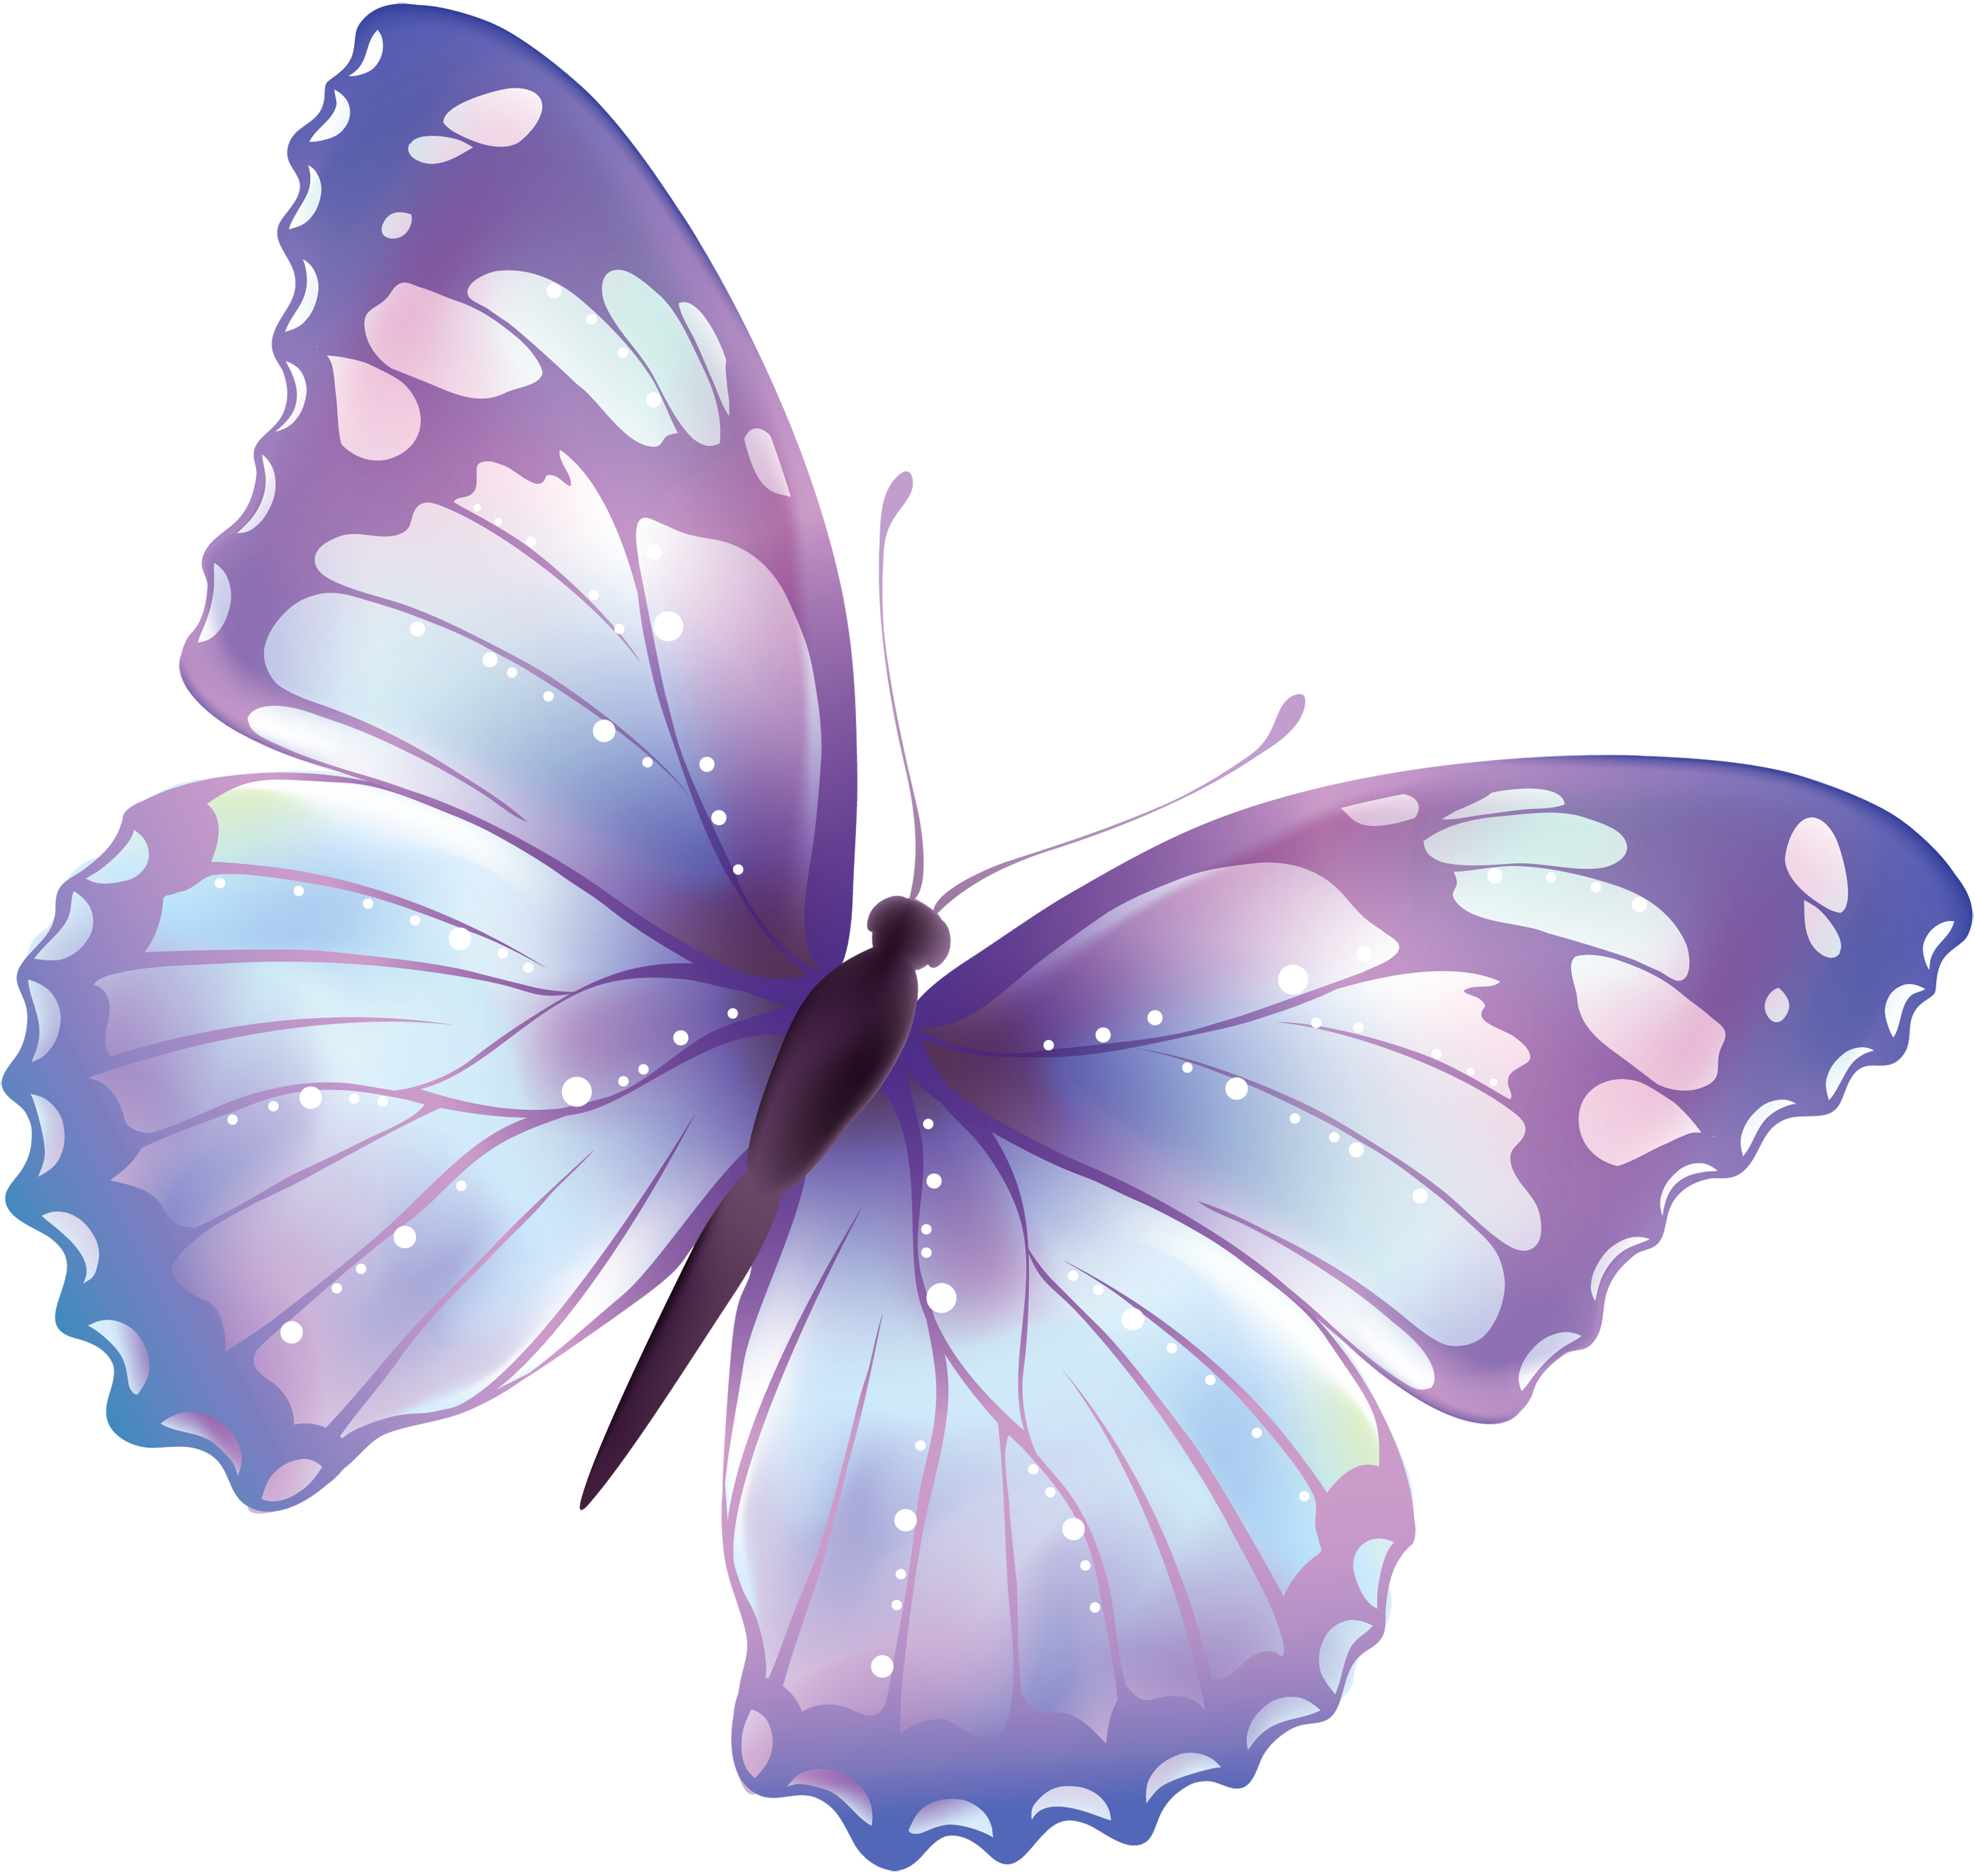 flying butterfly PNG image transparent image download, size